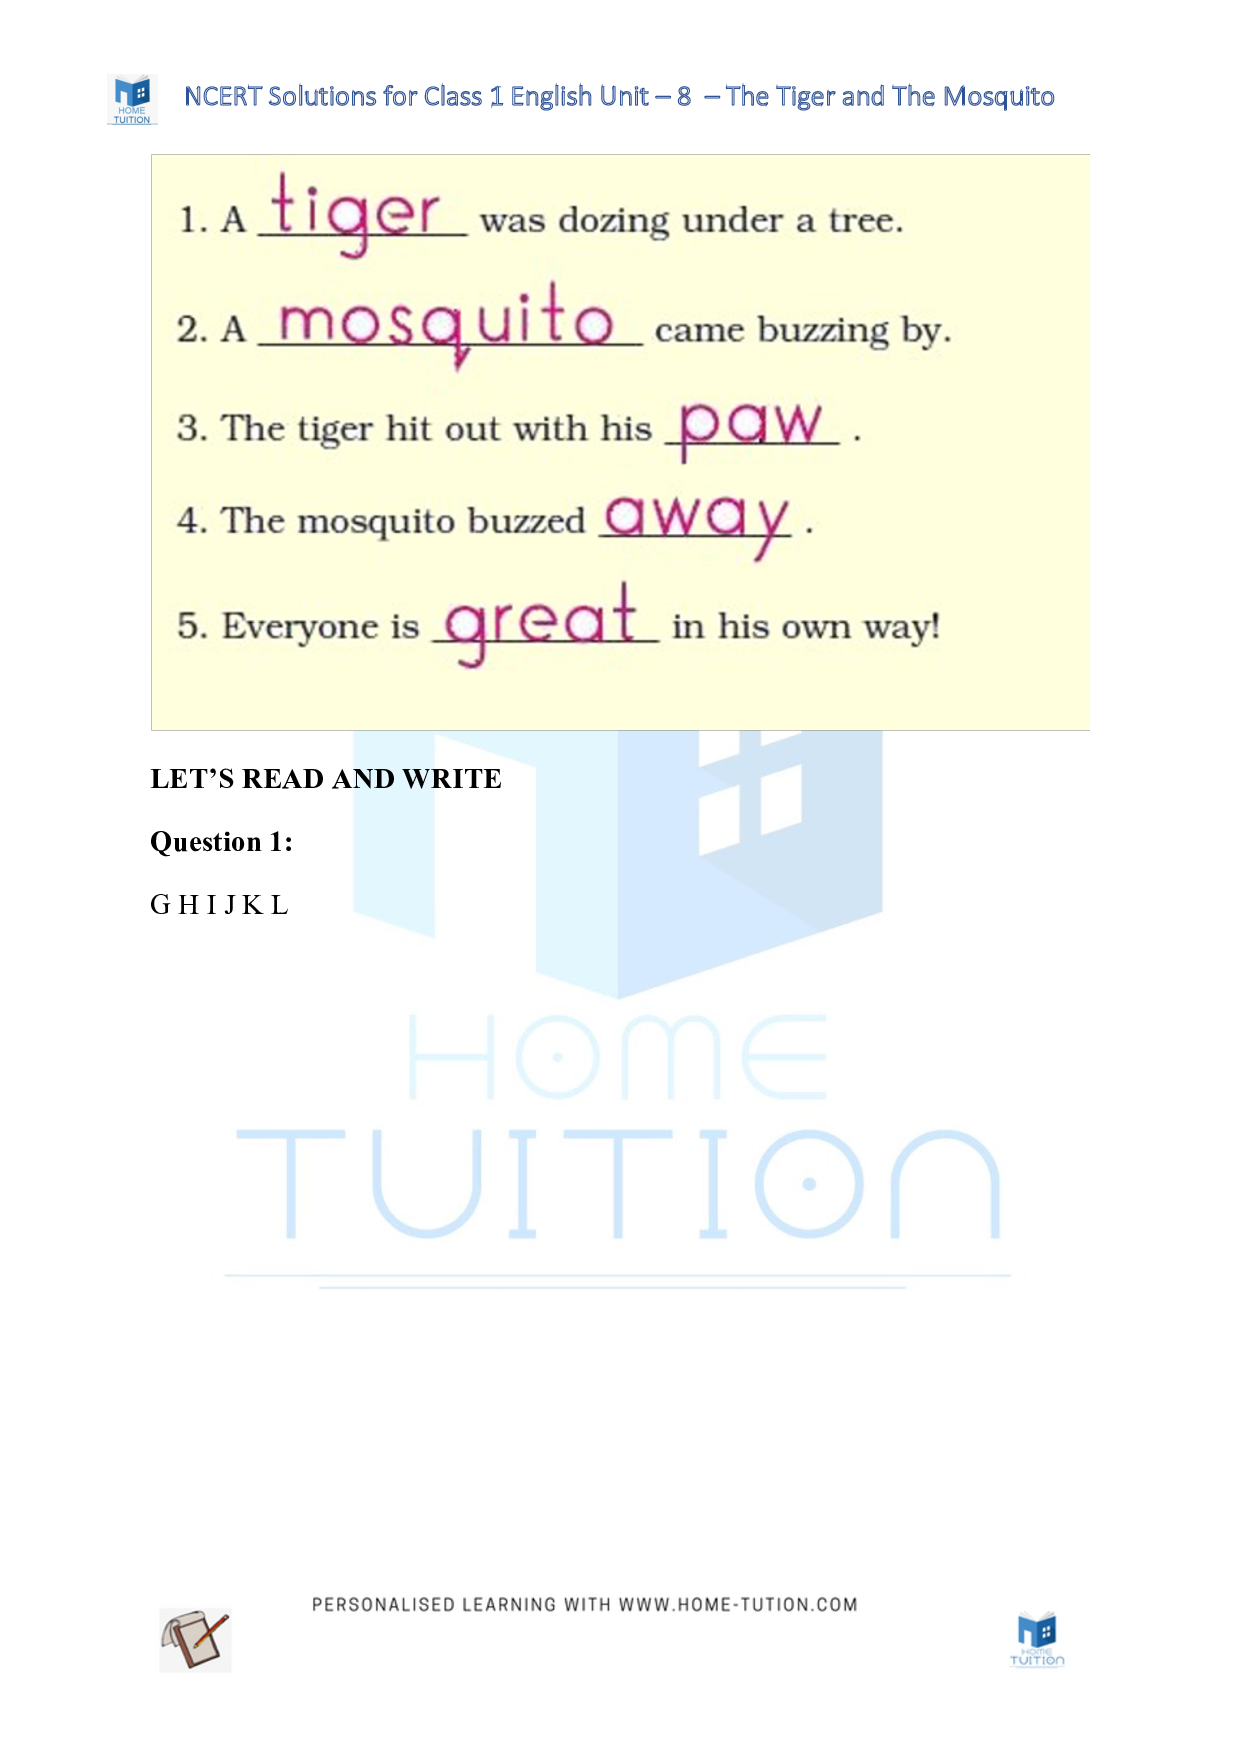 NCERT Solutions for Class 1 English Unit 8 - The Tiger and The Mosquito